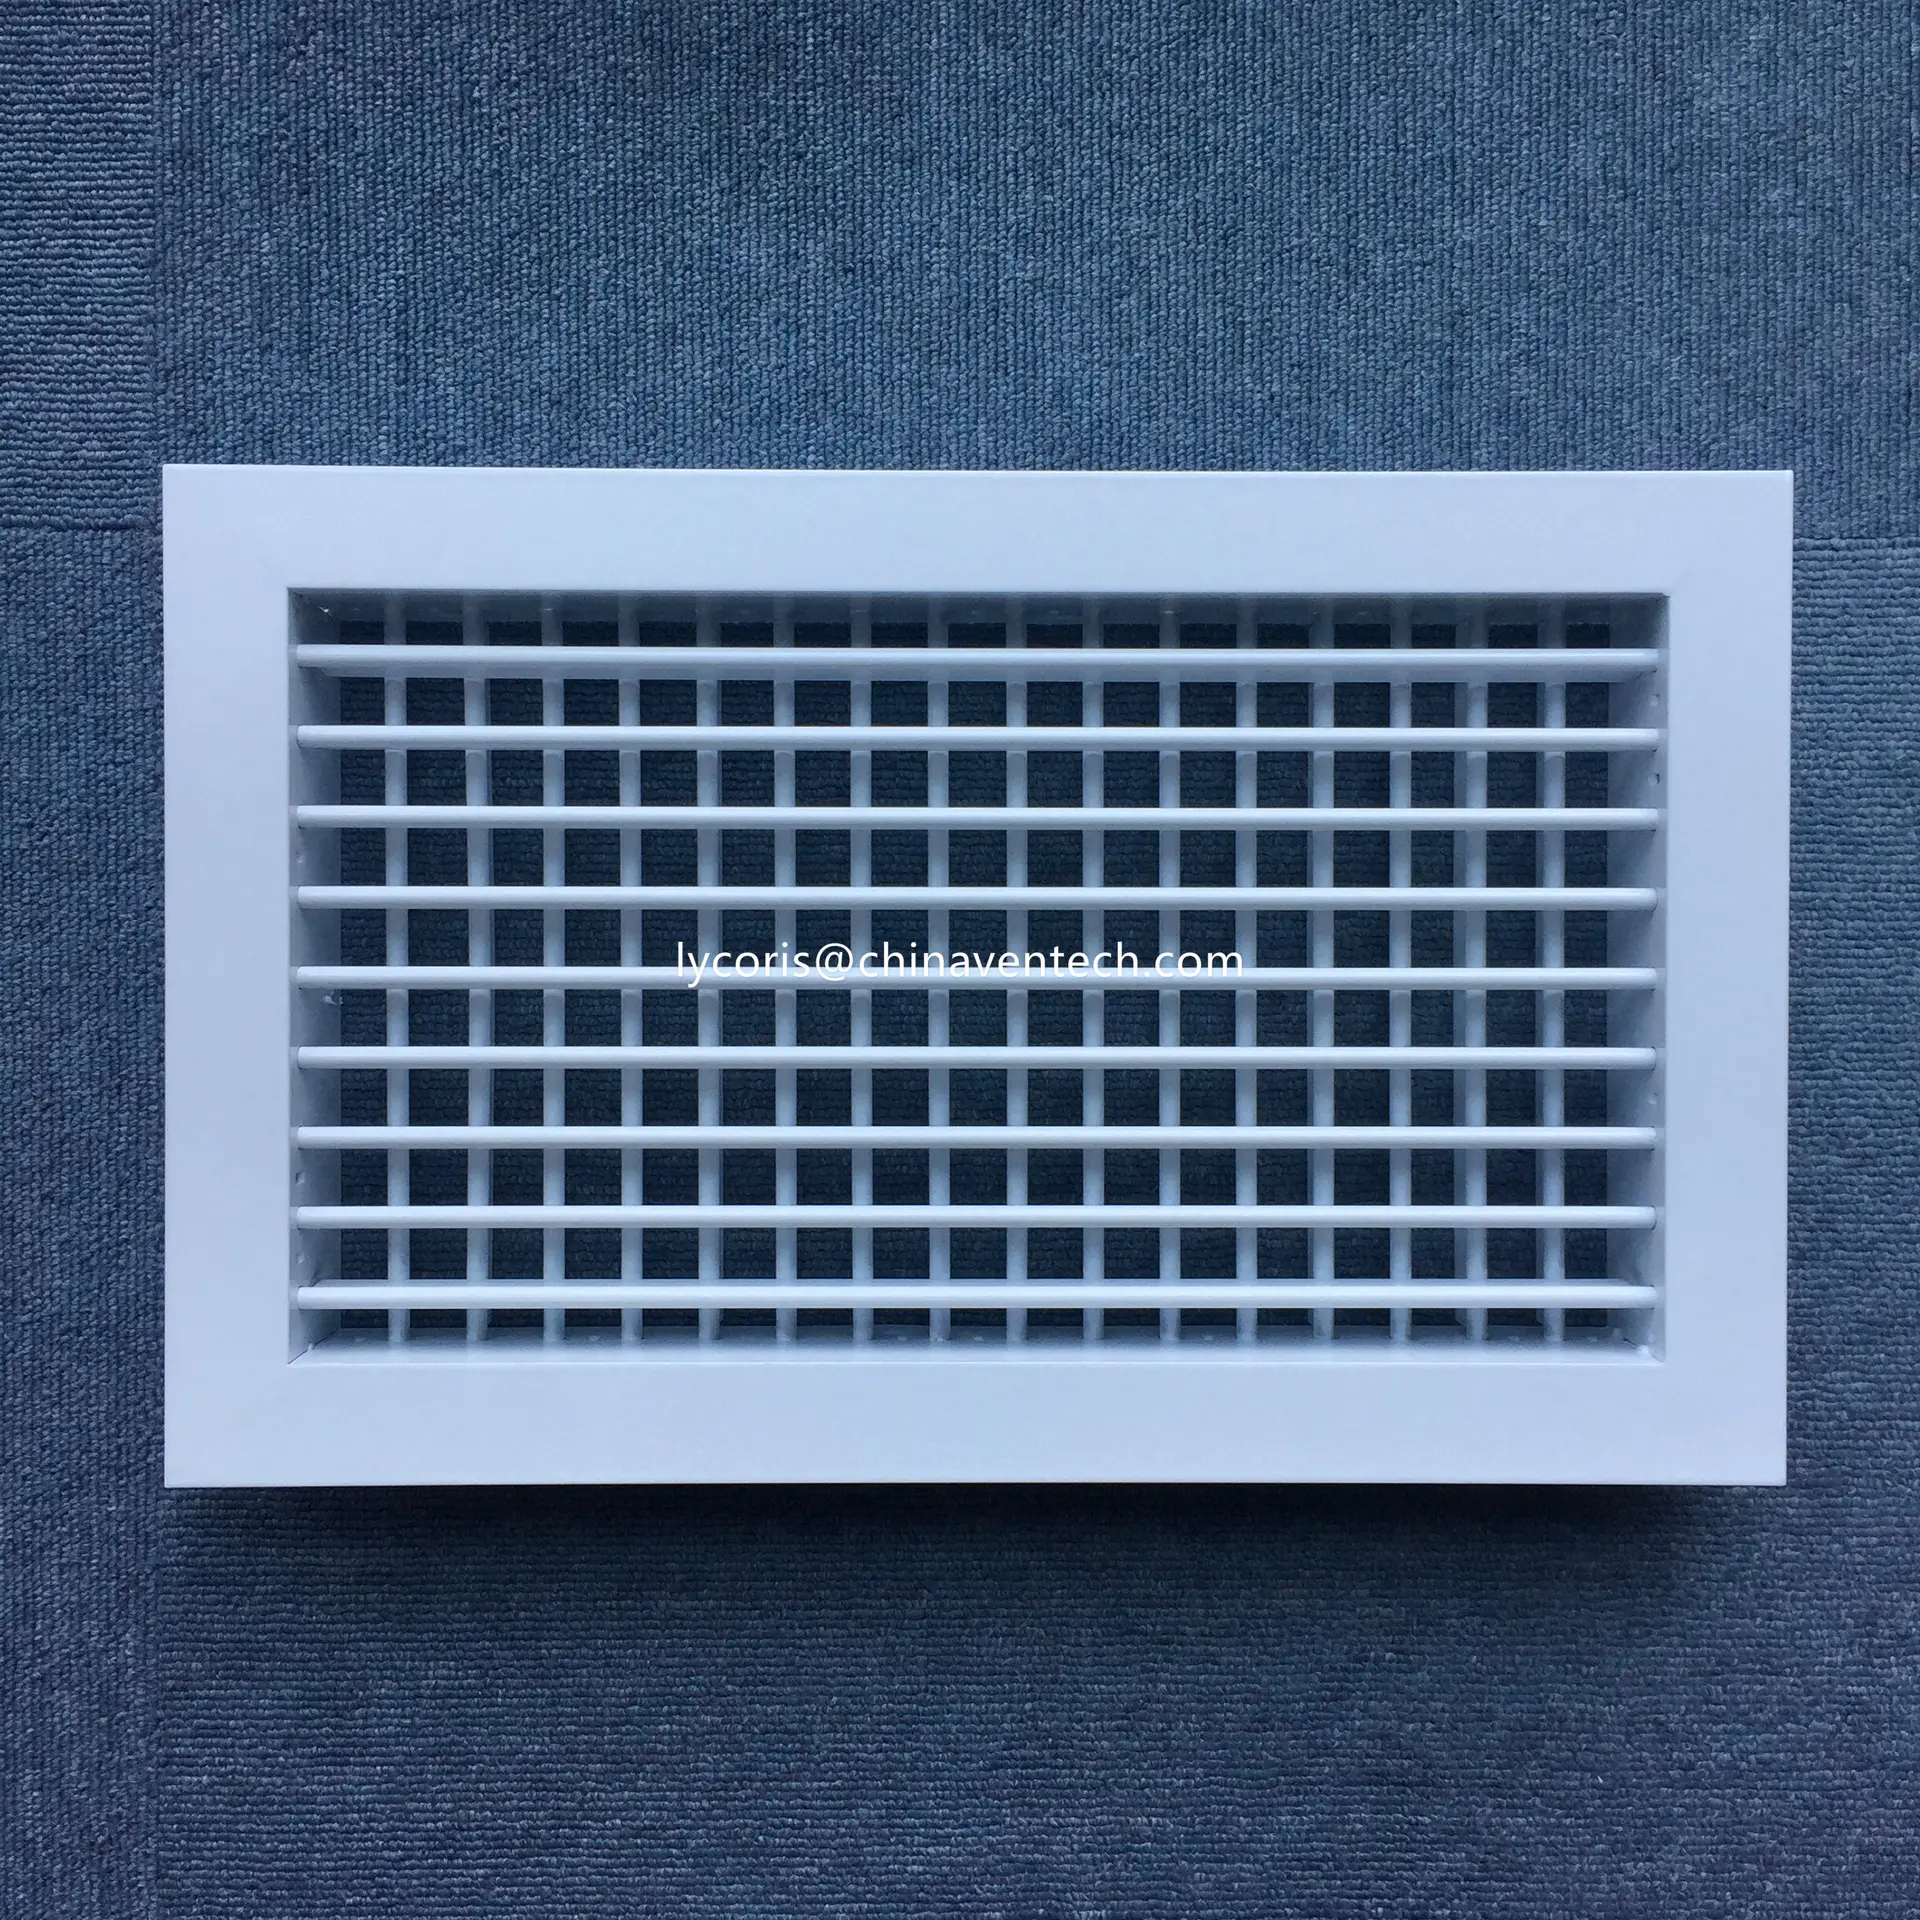 Air Vent Supply Aluminum Diffuser Oppose Blade Damper Ceiling Double Deflection Air Register Ventilation Air Grille for HVAC